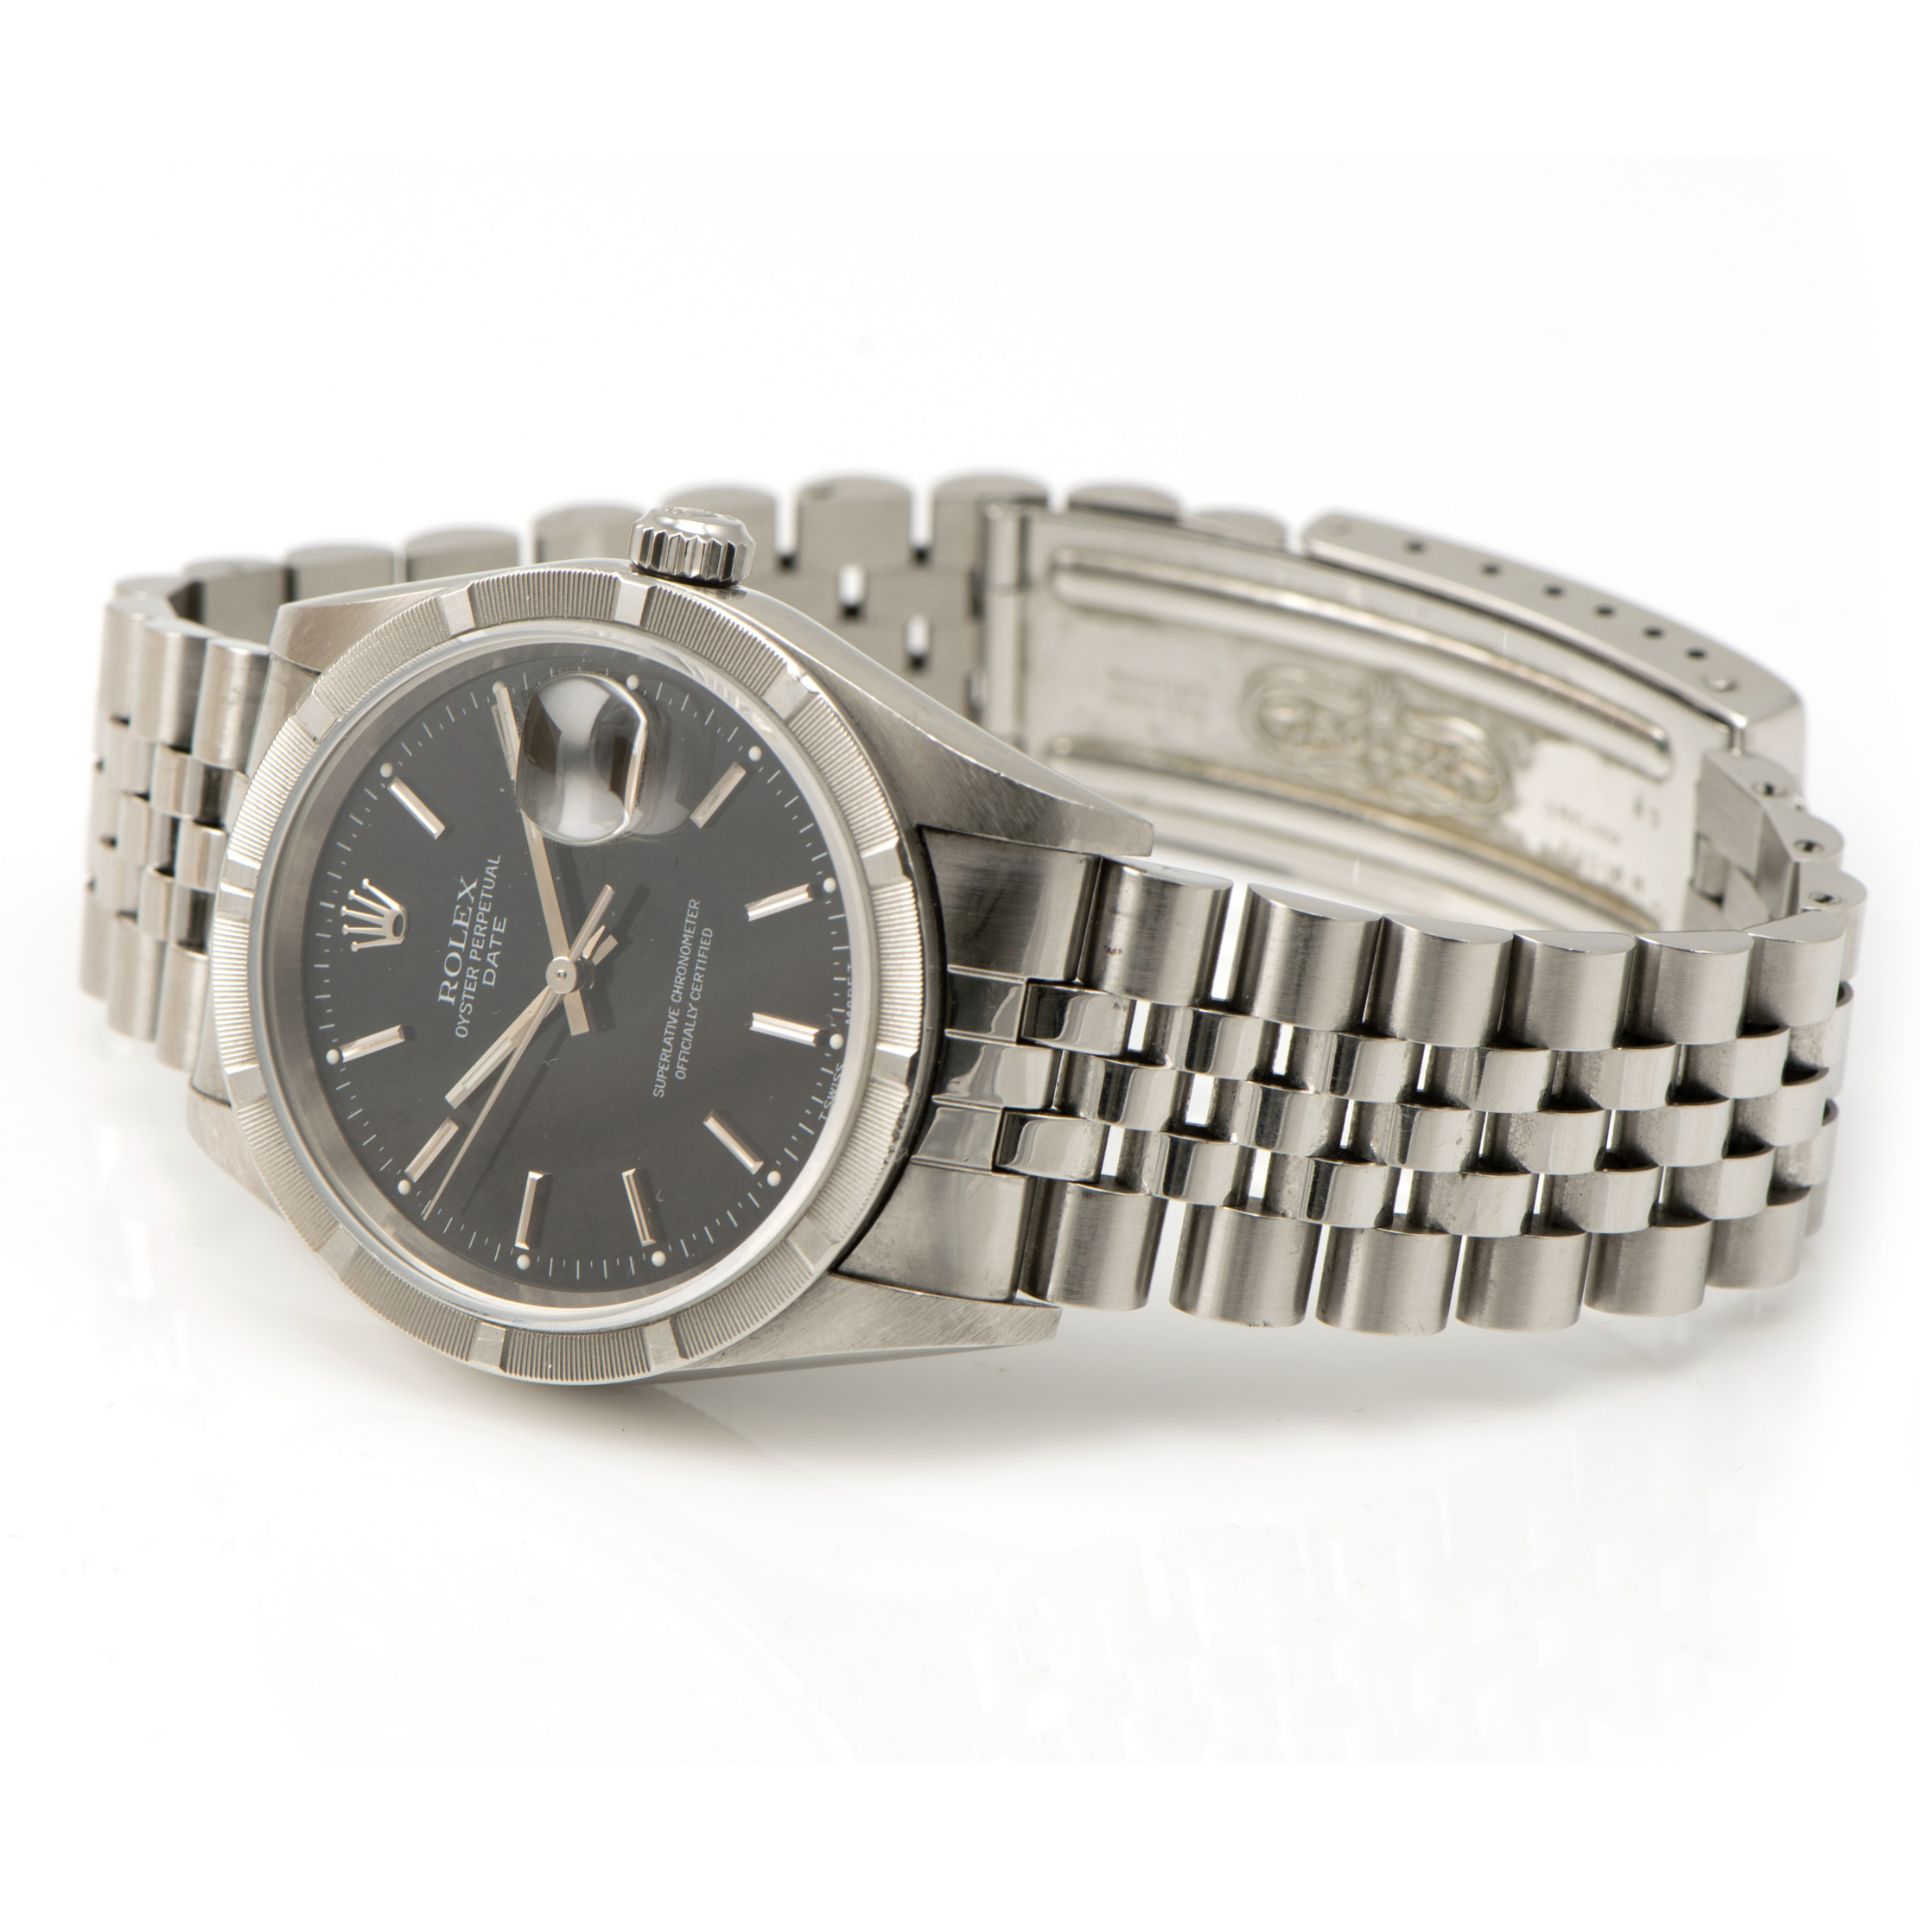 Rolex Oyster Perpetual Date - Image 2 of 4